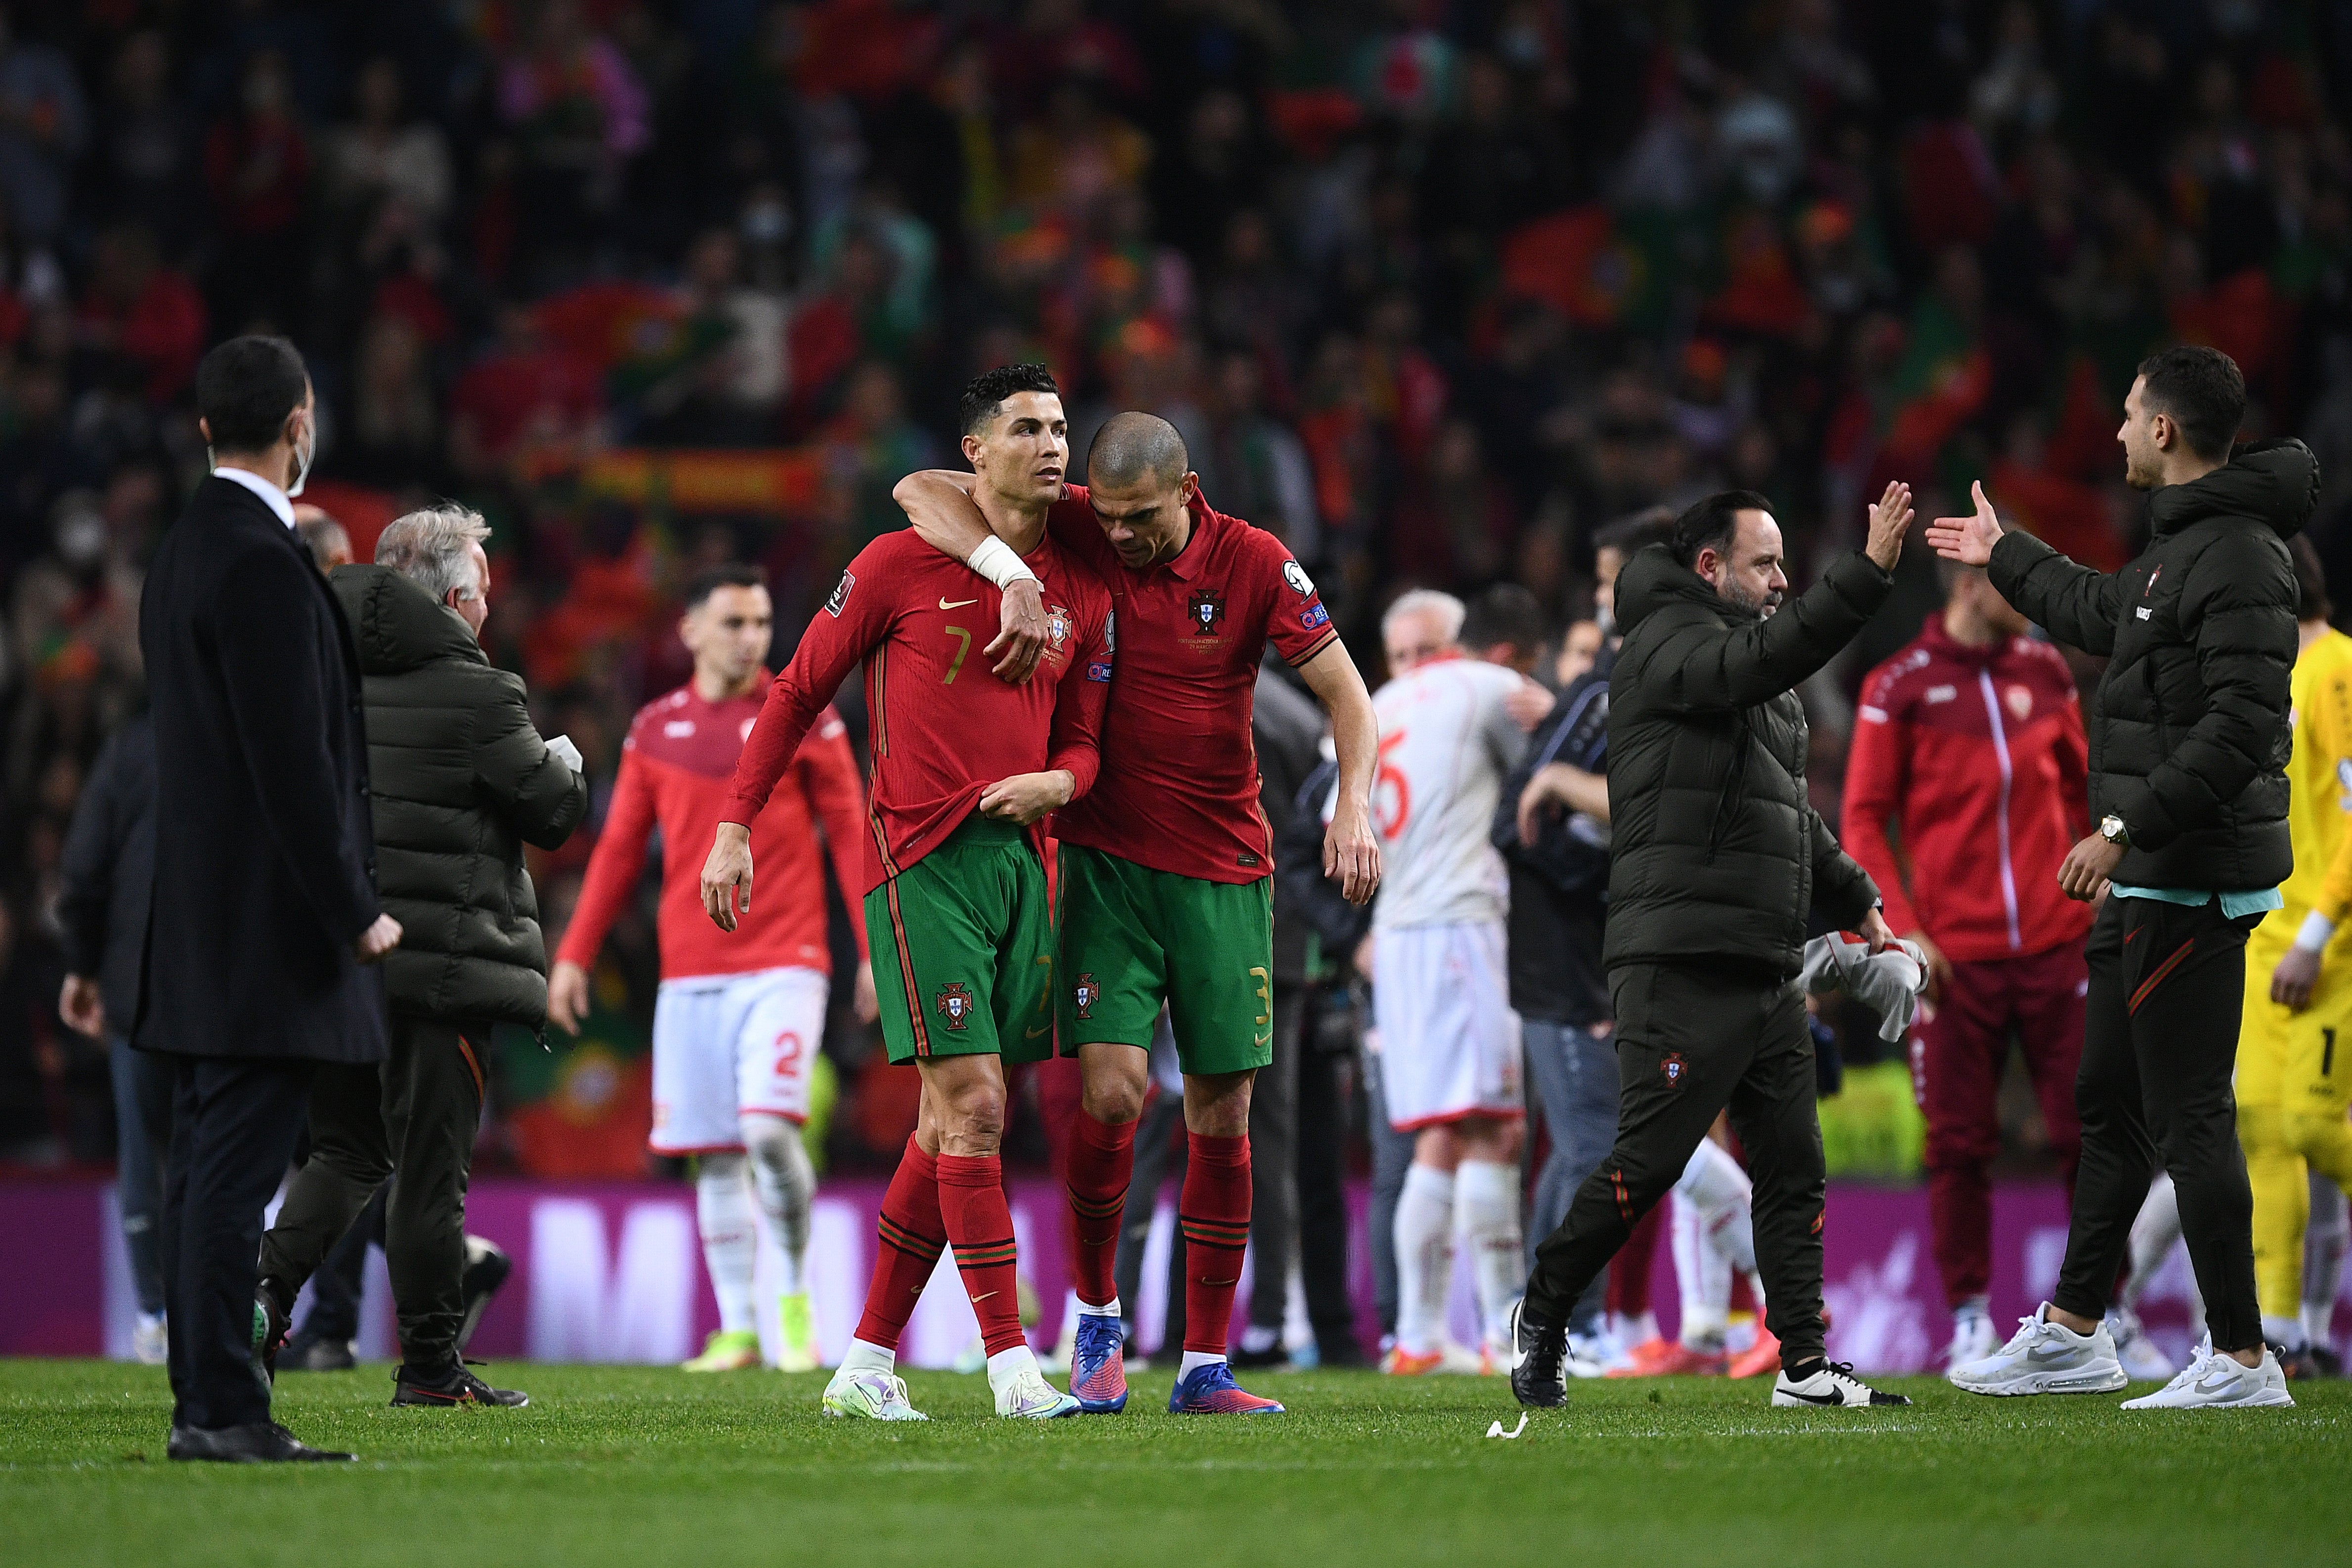 Cristiano Ronaldo set up the opener as Portugal booked their place at the 2022 Fifa World Cup